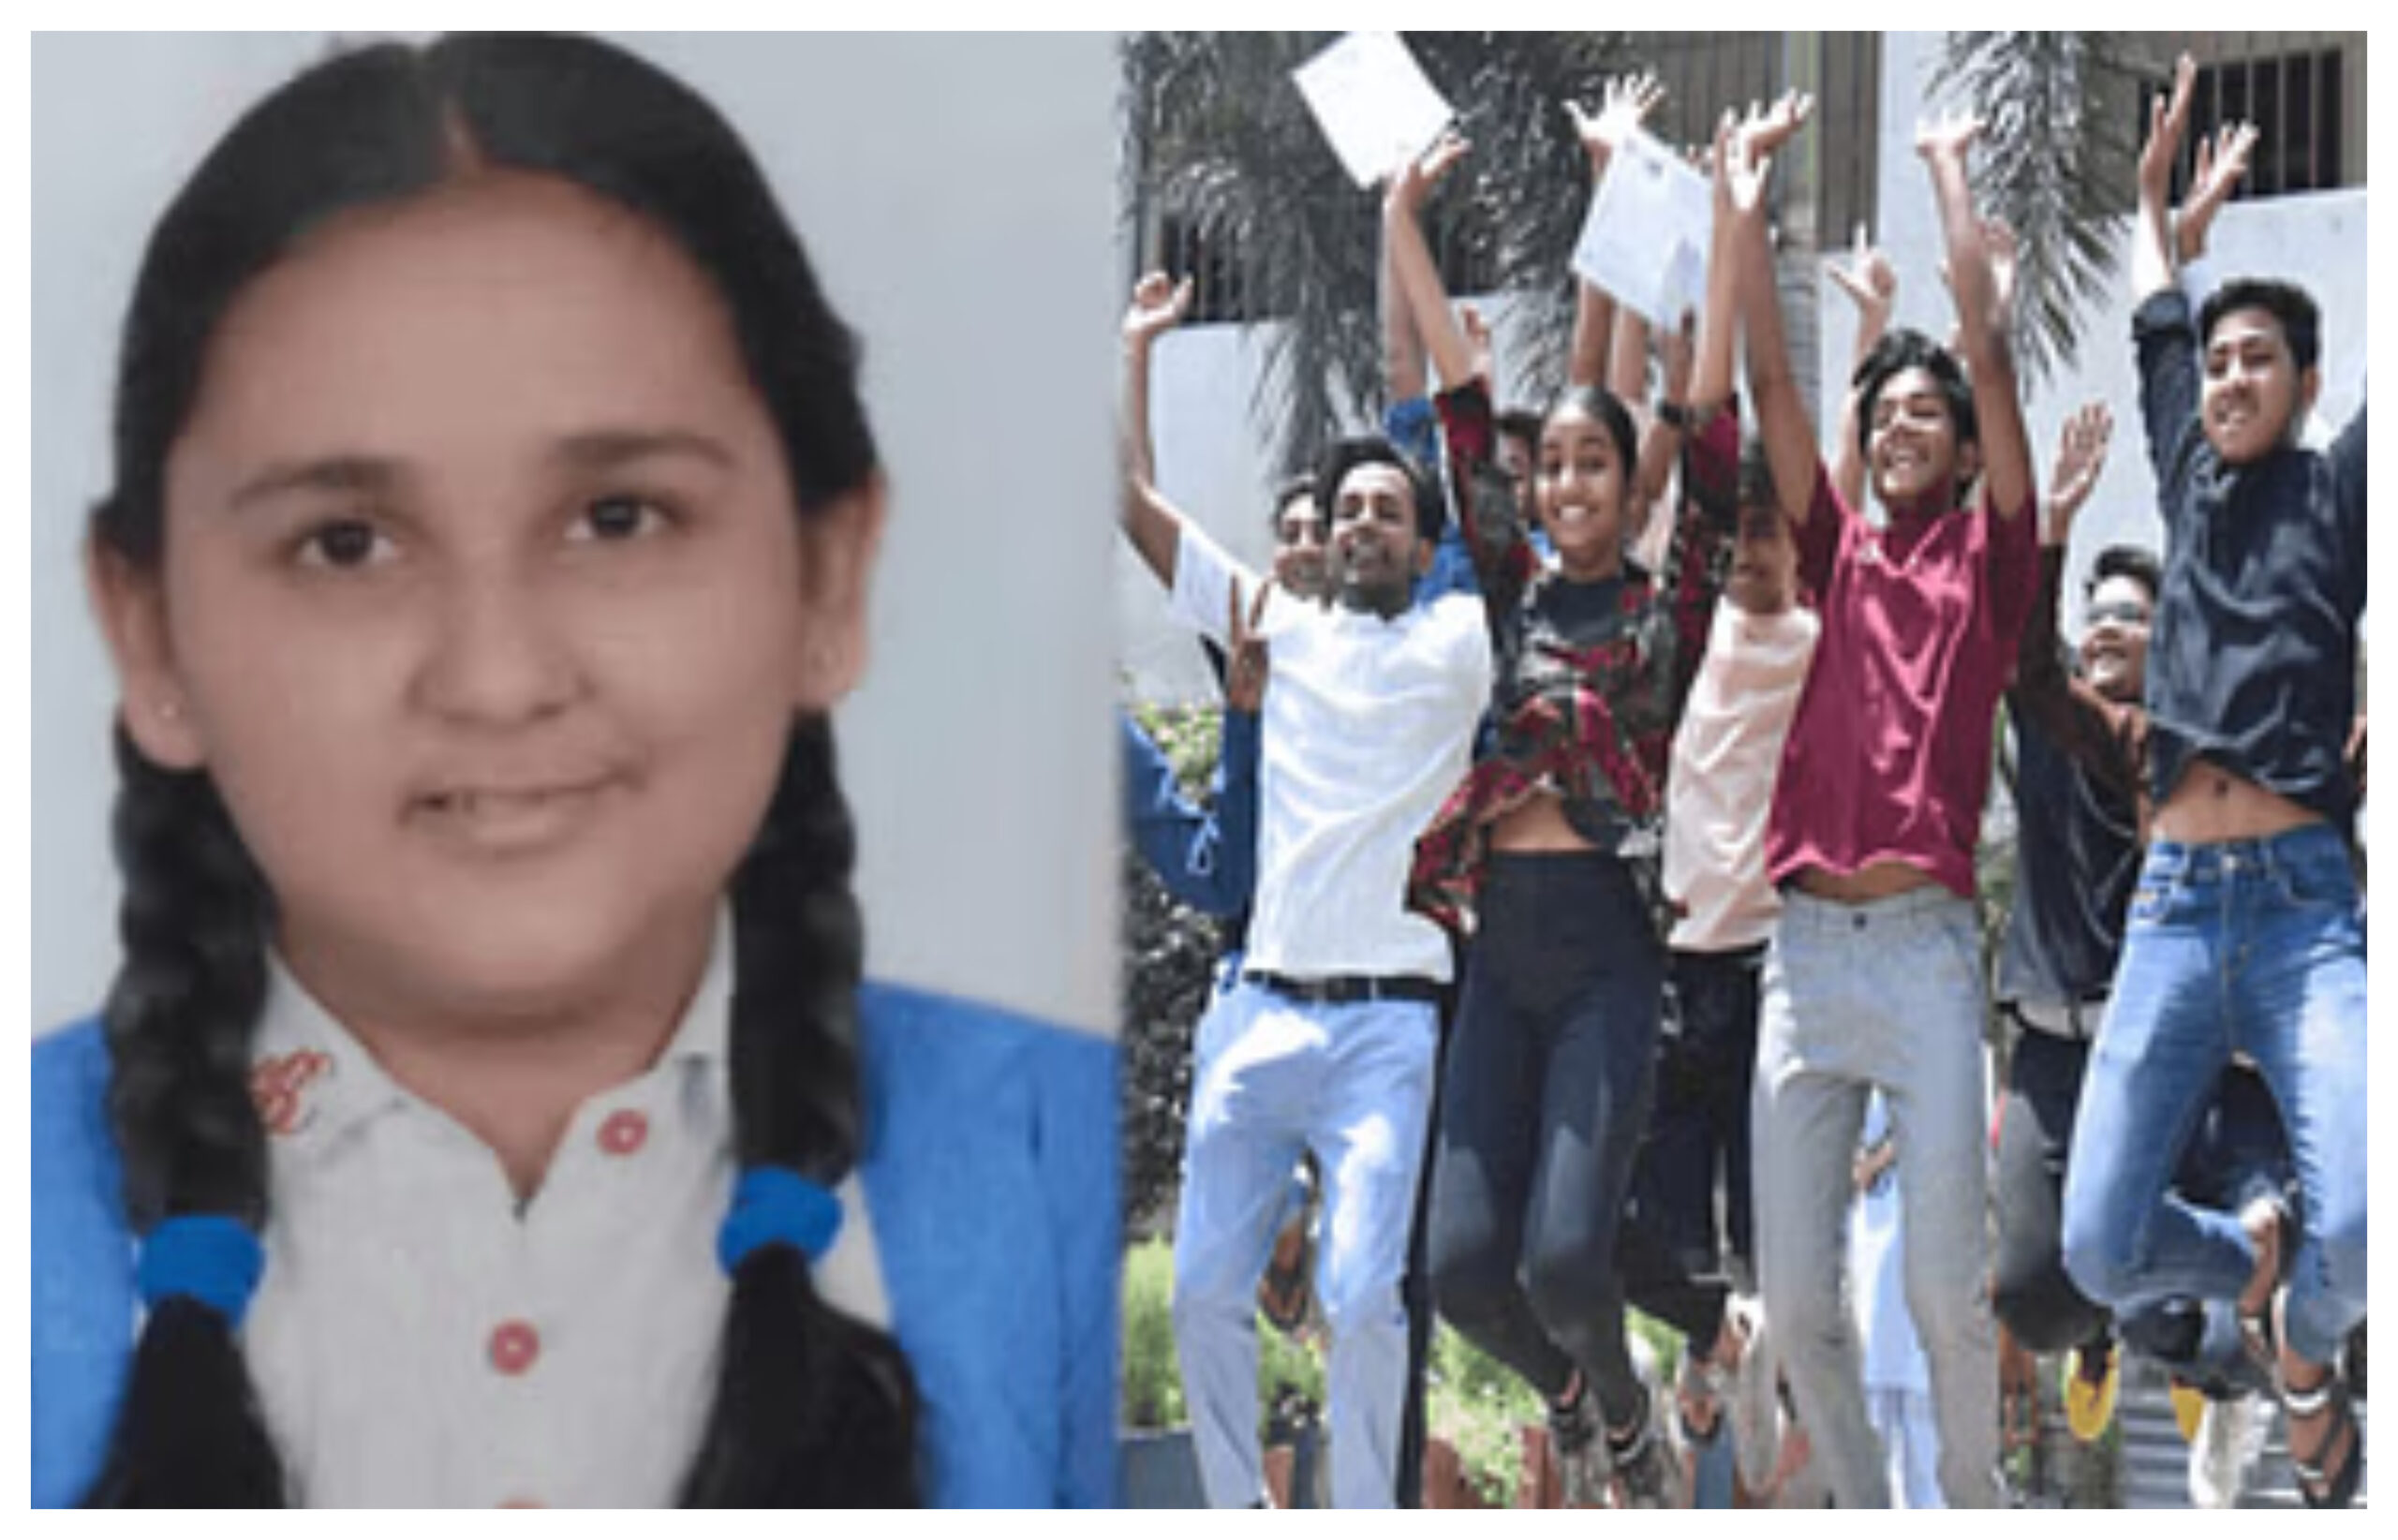 CISCE Result: CISCE 10th, 12th class results declared, girls won, #boards #education #results-youtube-twitter-google-facebook-amazon, Cisce, cisce 10th result 2024, icse isc results 2024 updates, Delhi NCR News in Hindi, Latest Delhi NCR News in Hindi,